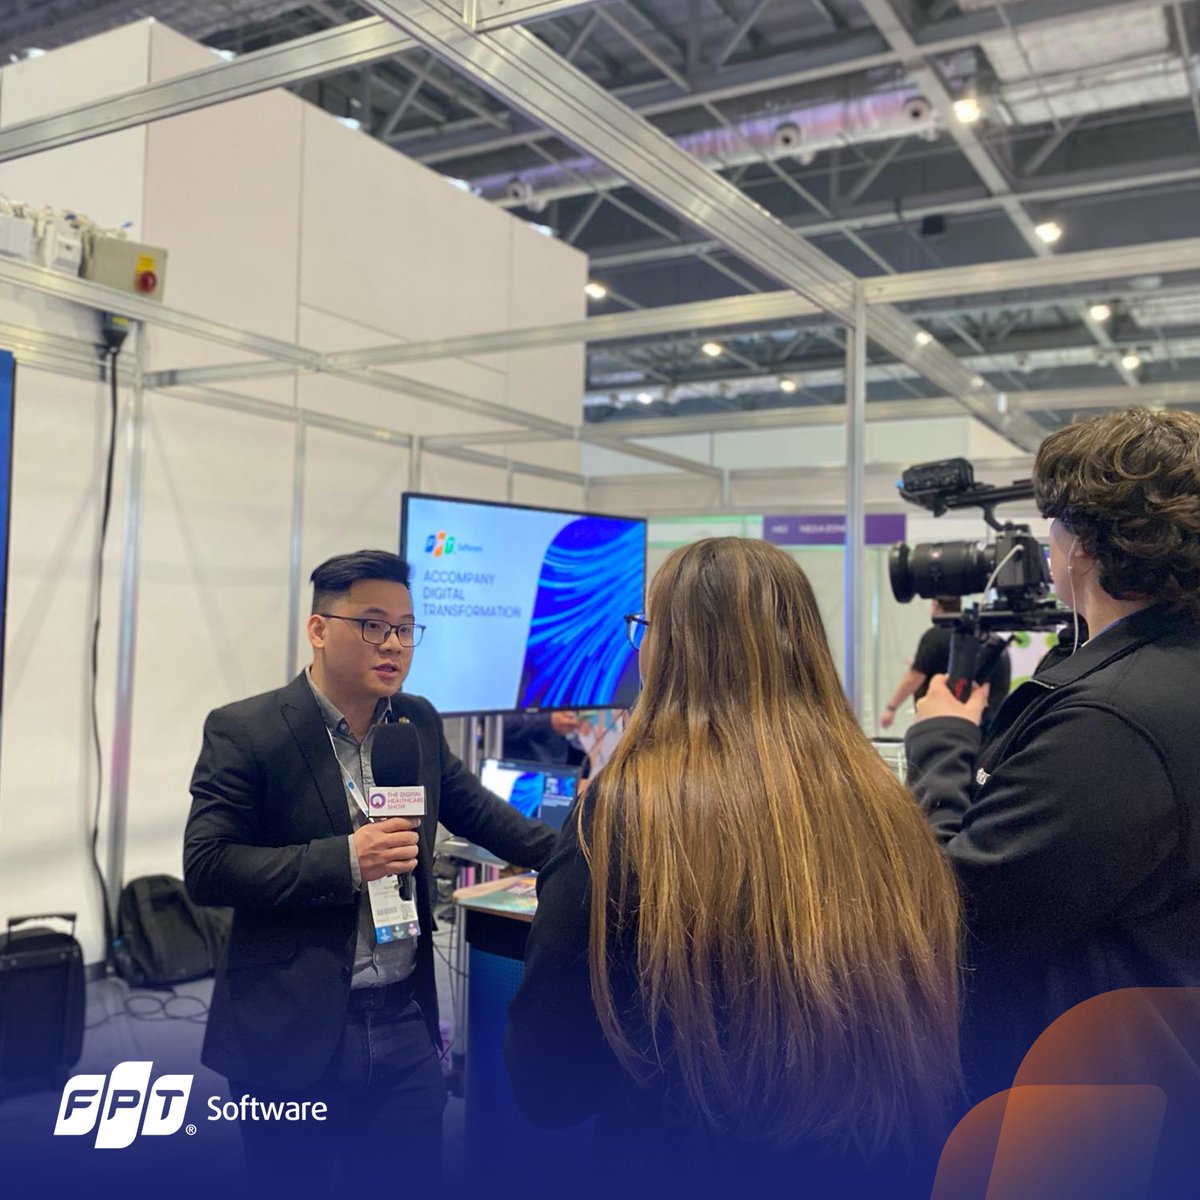 That’s a wrap for Digital Healthcare Show! #FPTSoftware had wonderful time discussing with other industry leaders on the future of digital healthcare industry. Here we also showcased our emerging technologies for digital transformation: AI, IoT and more.
#DigitalHealthcareShow